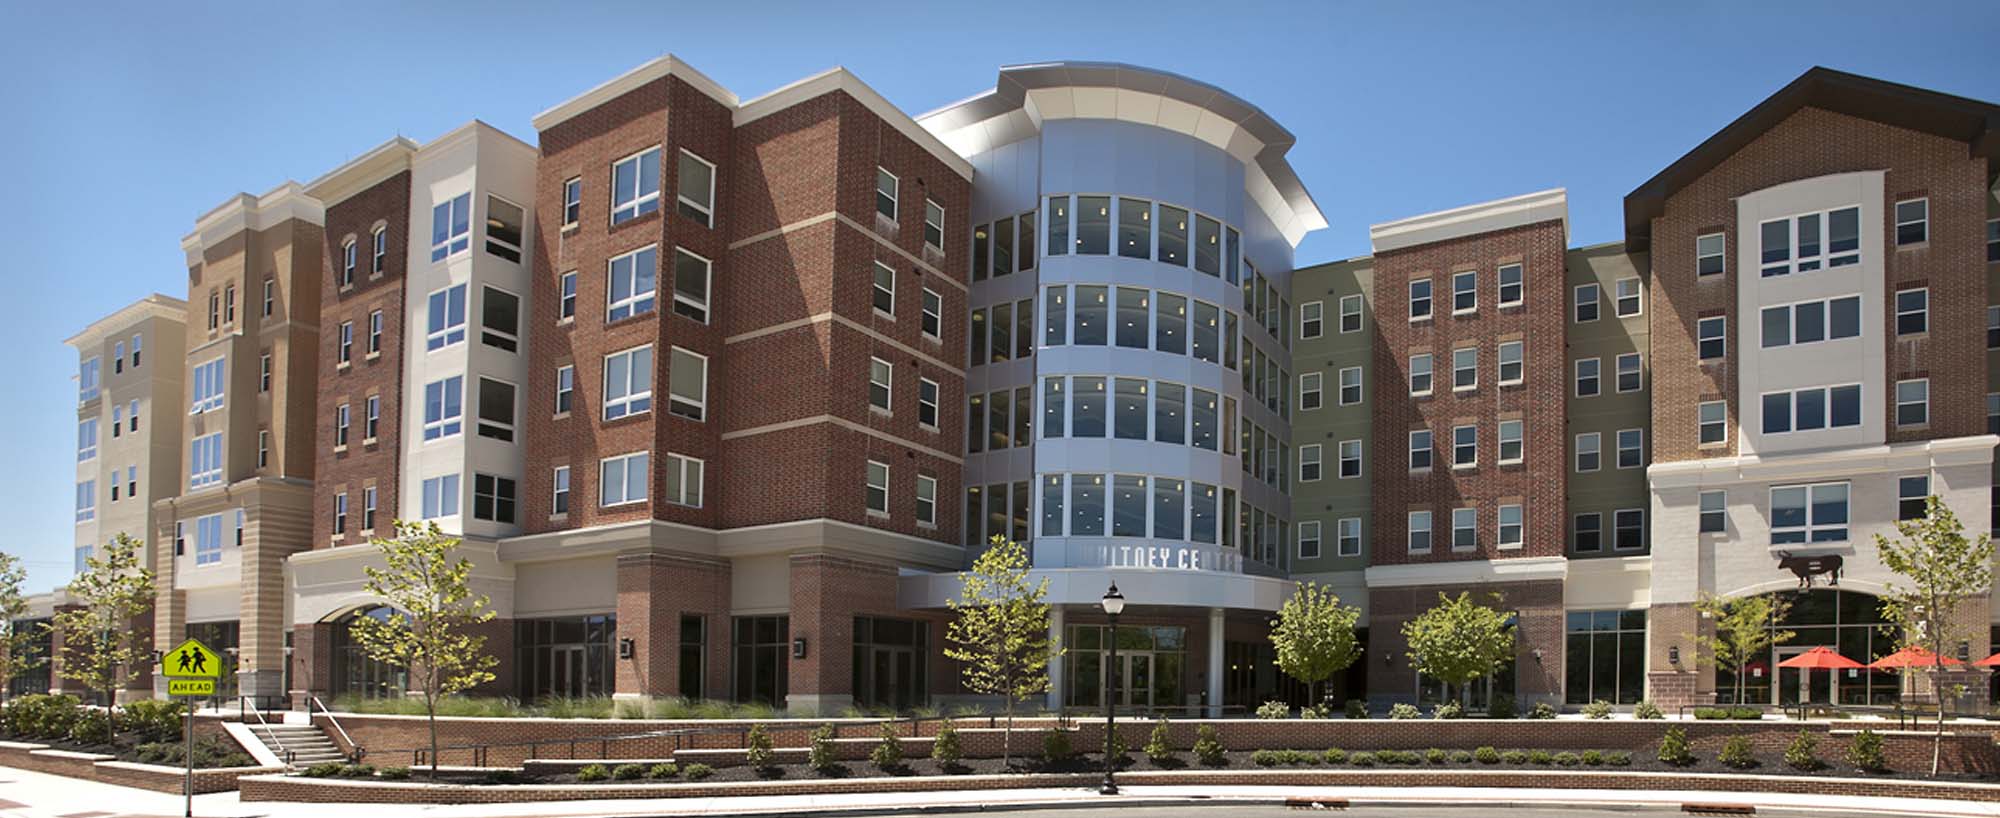 Rowan University opens new buildings equipped with state-of-the